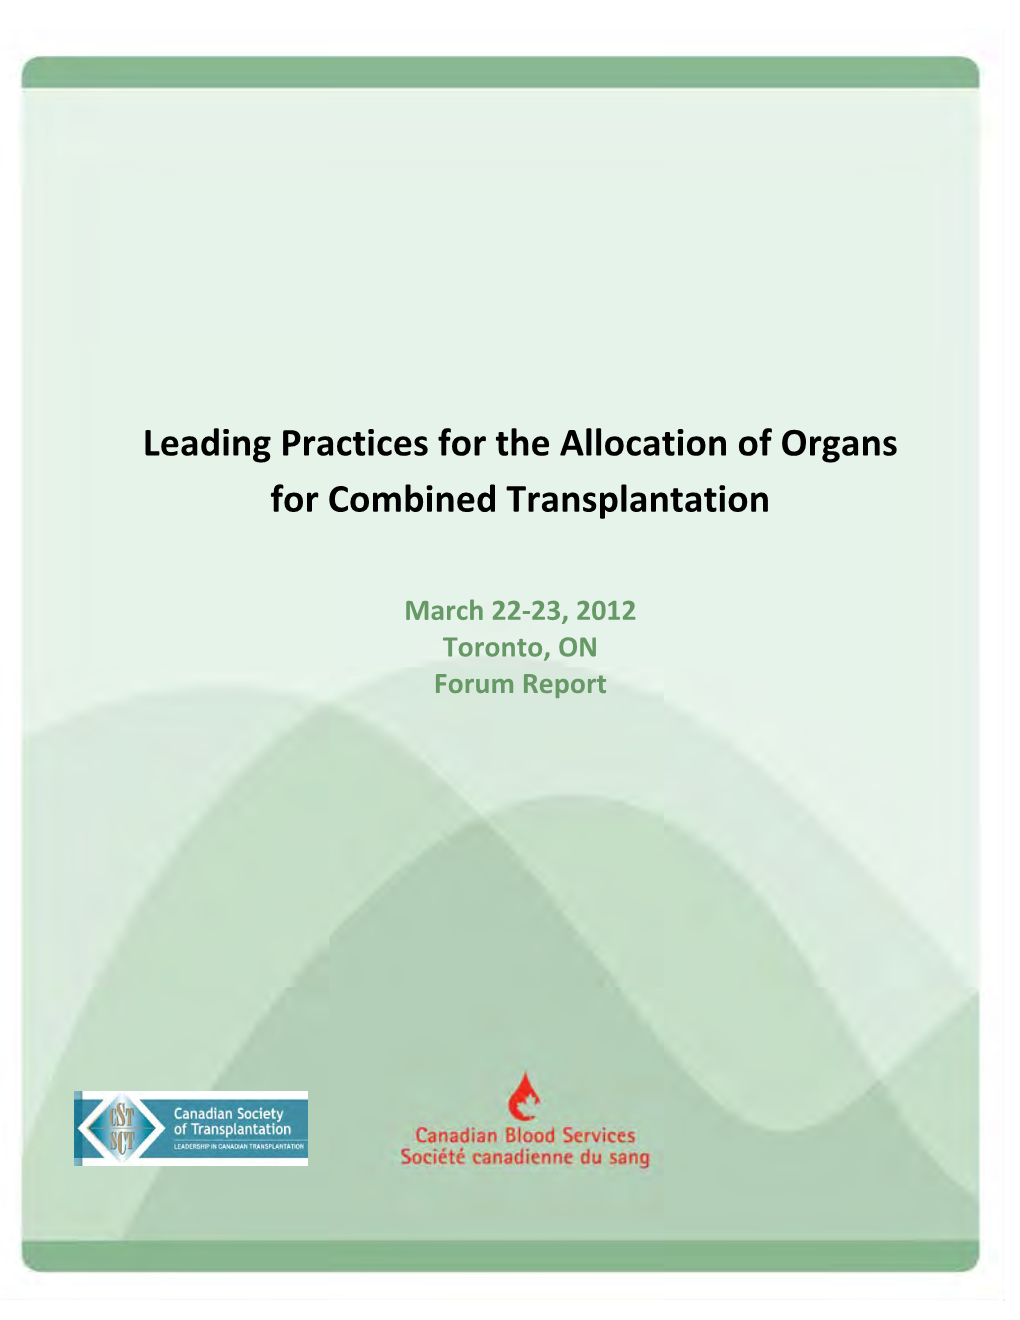 Leading Practices for the Allocation of Organs for Combined Transplantation